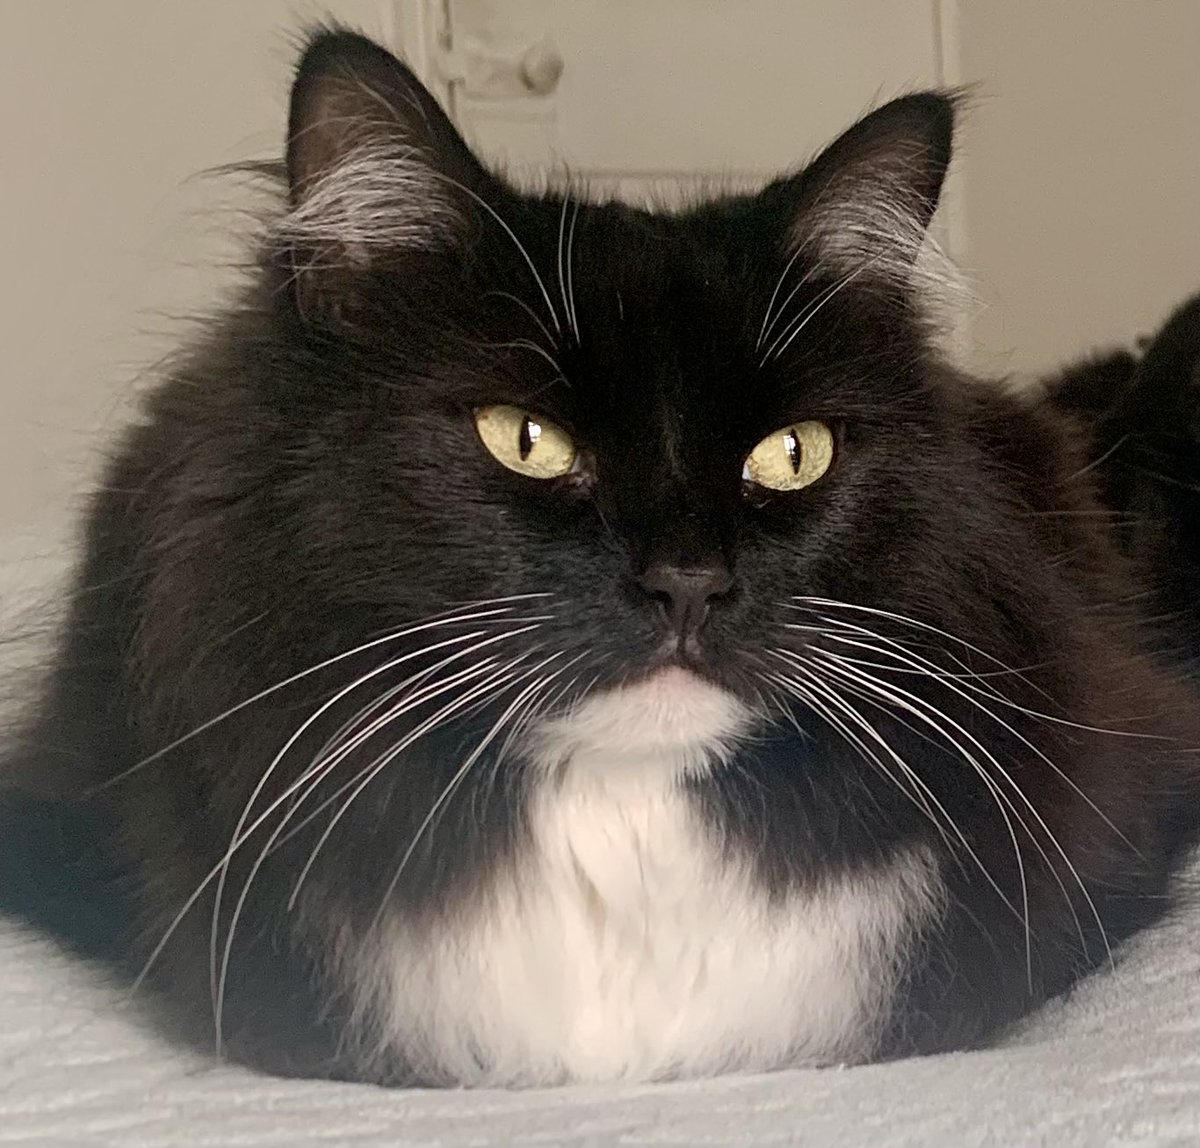 A puurrrfect loaf from Nancy this #kittyloafmonday - have a great day everyone 🐈‍⬛💕🍞